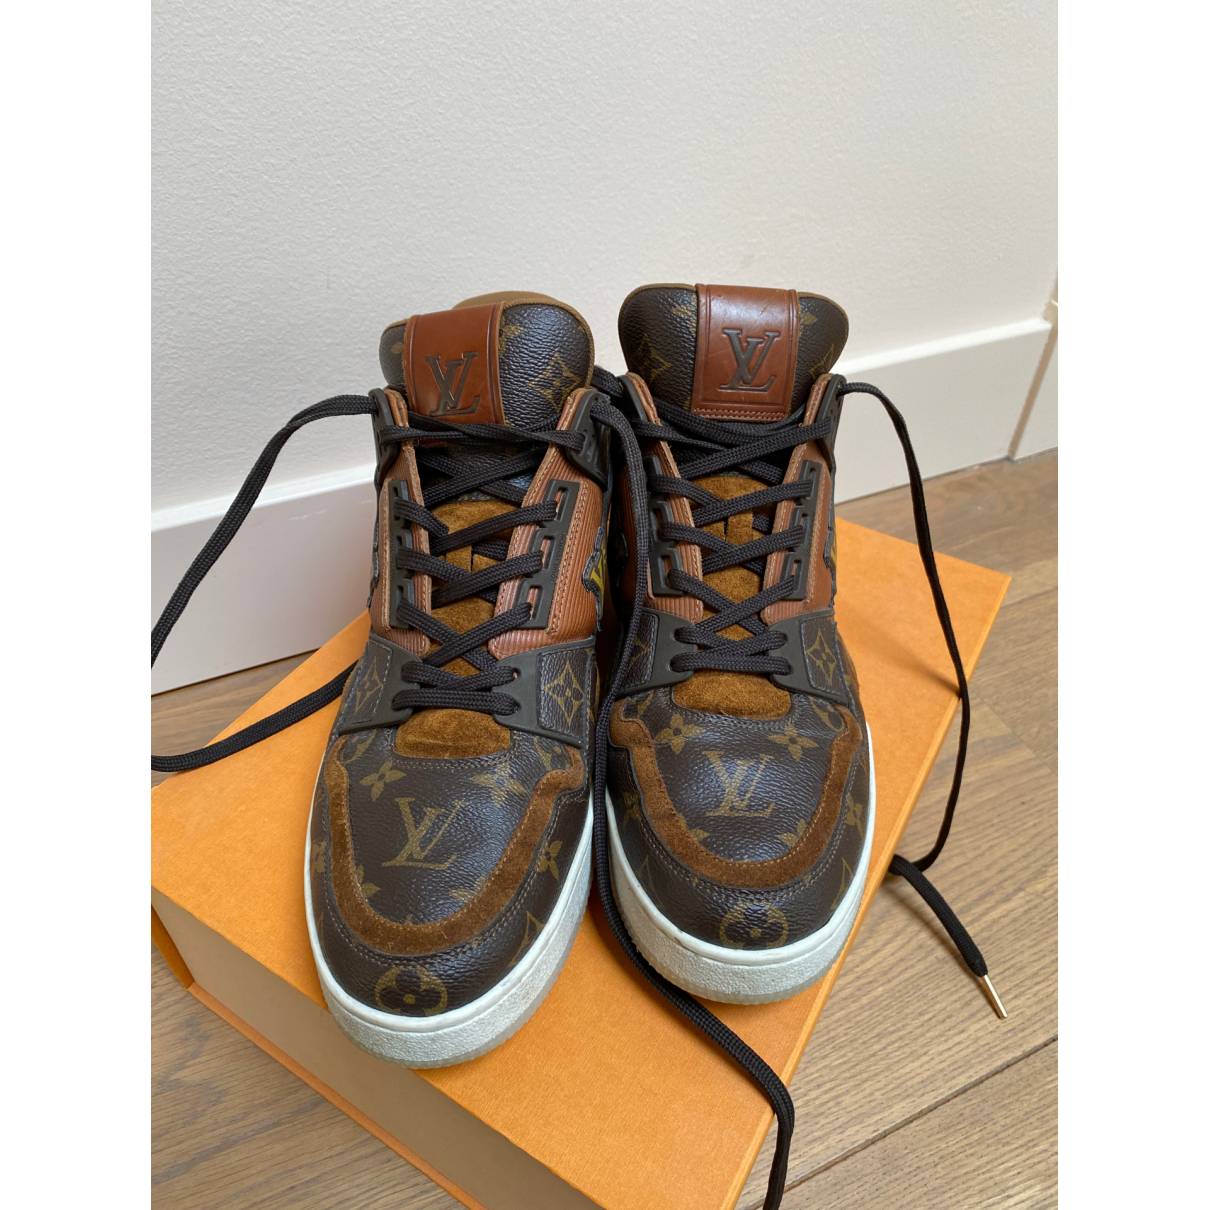 Louis Vuitton Trainer Low “Yellow Brown”